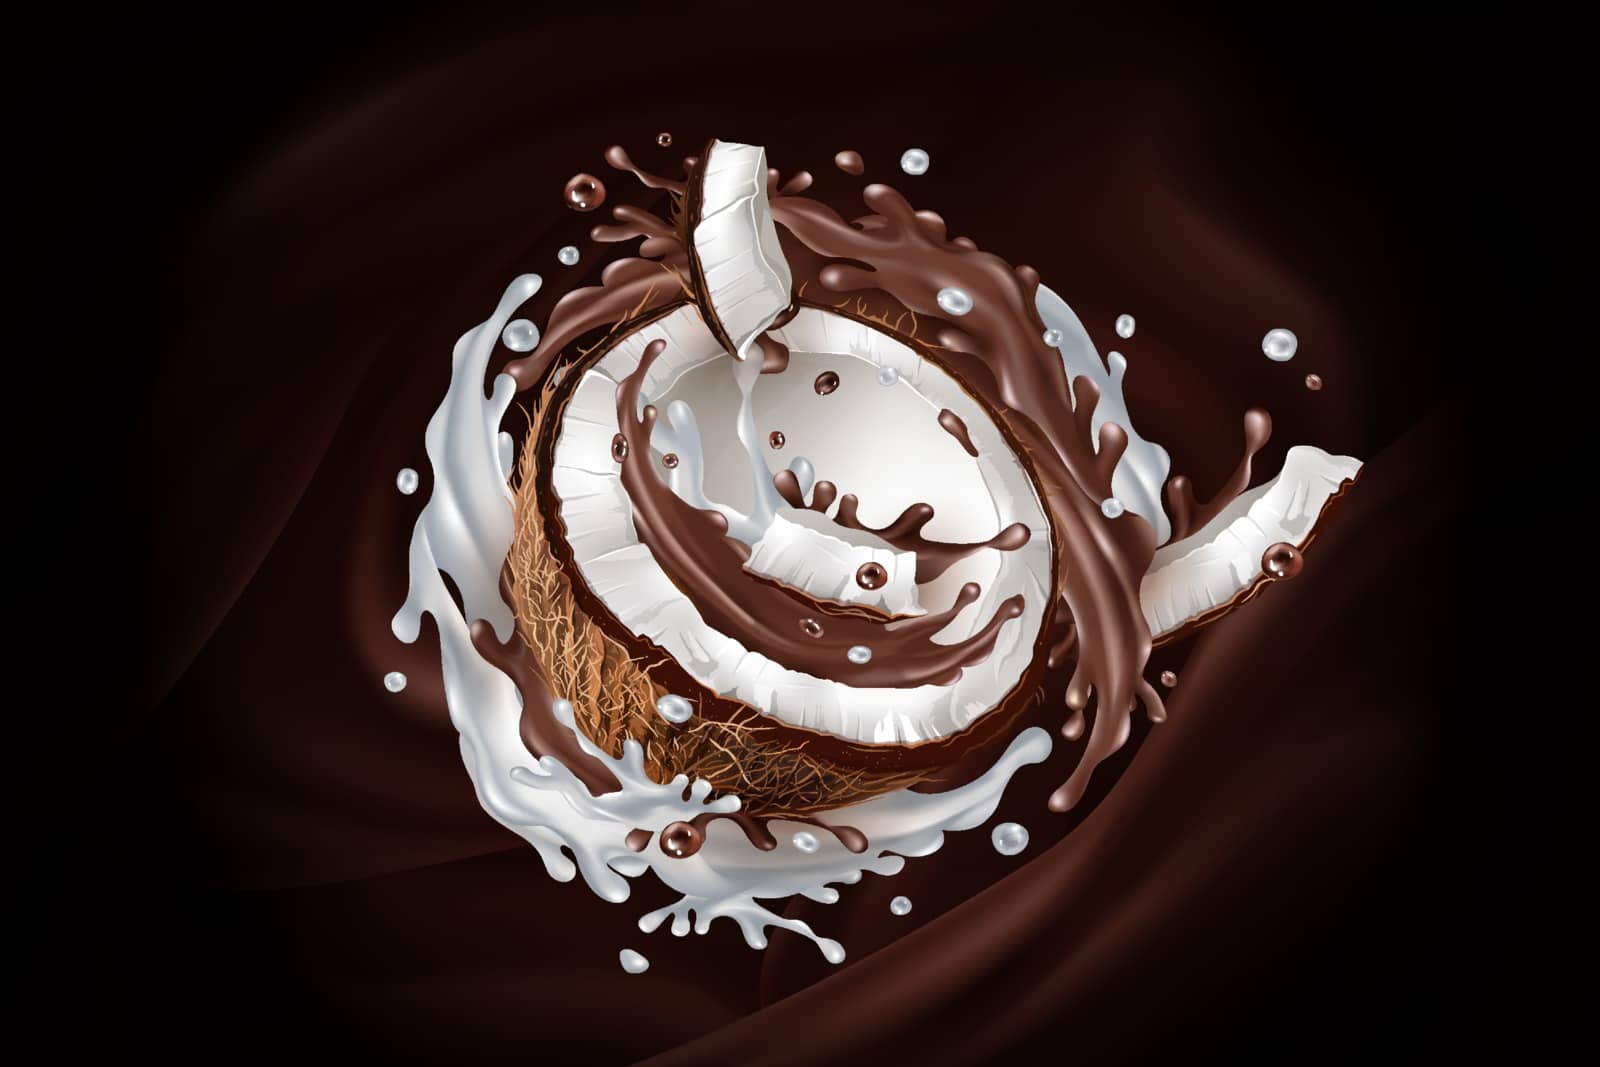 Sliced coconut in a milky and chocolate splash on a dark chocolate background. Realistic vector illustration.